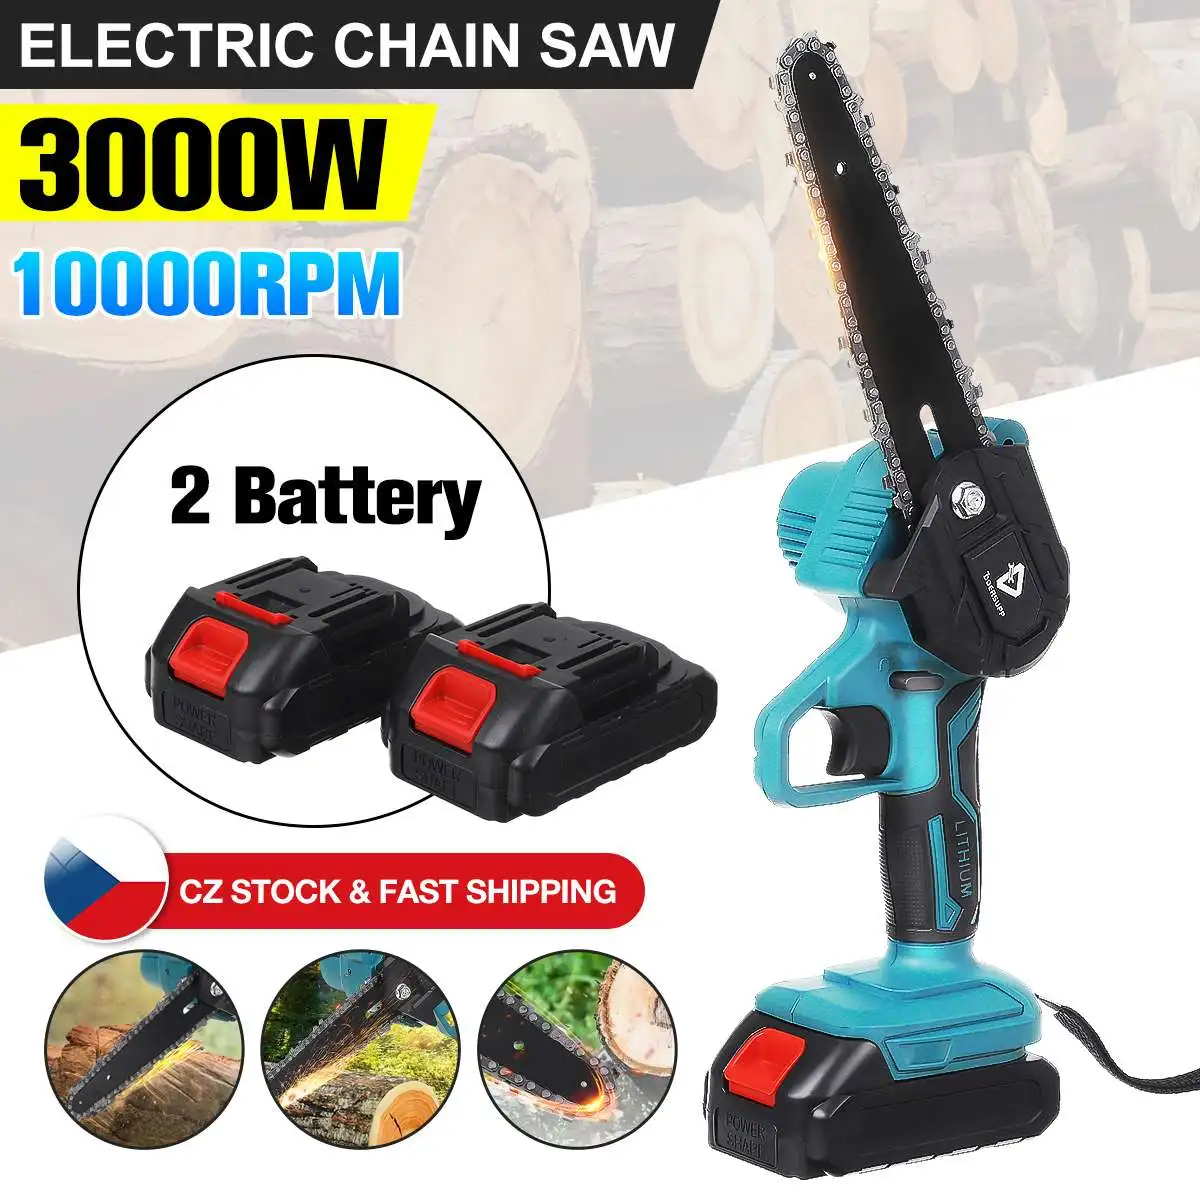 

6 Inch 3000W Electric Chain Saw Cordless Pruning ChainSaw Garden Tree Logging Woodworking Power Tool for Makiita 18V Battery